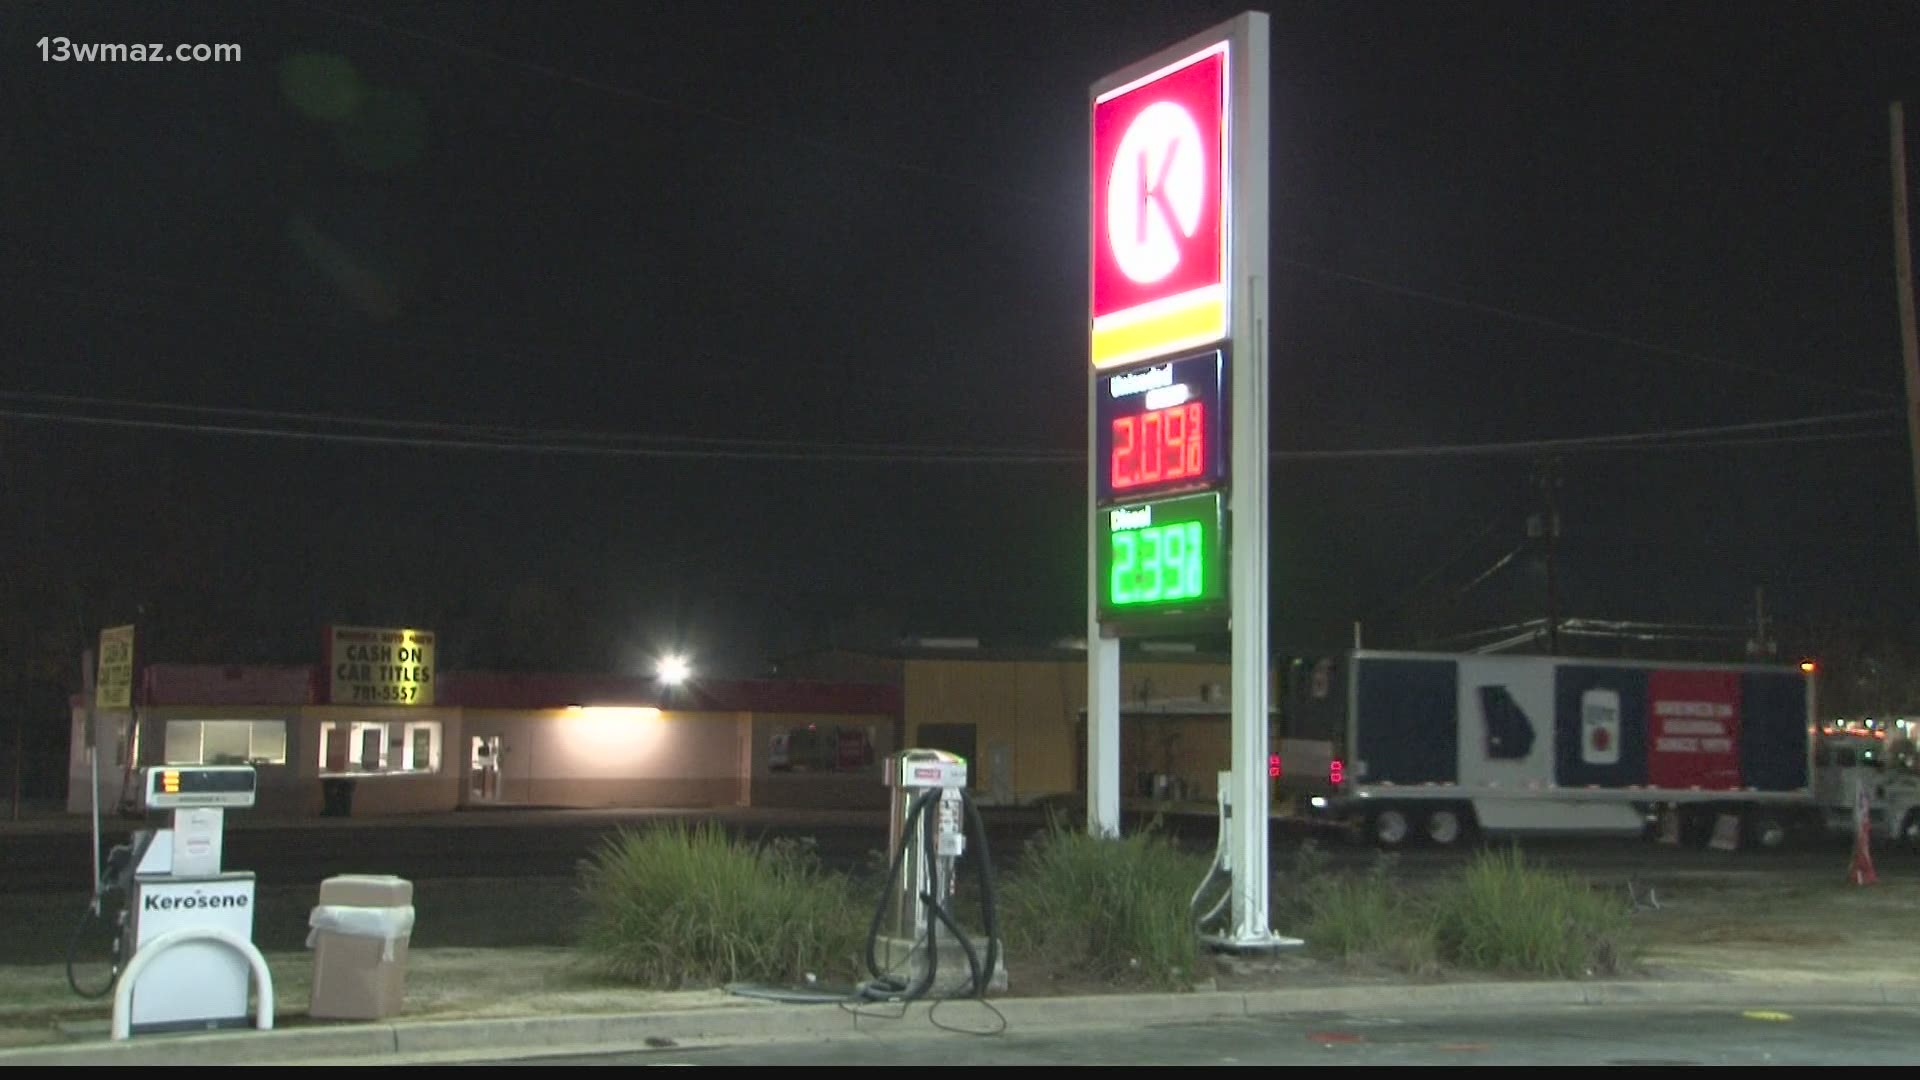 Three men robbed the gas station in Macon early Saturday morning. Deputies are still trying to locate the men.